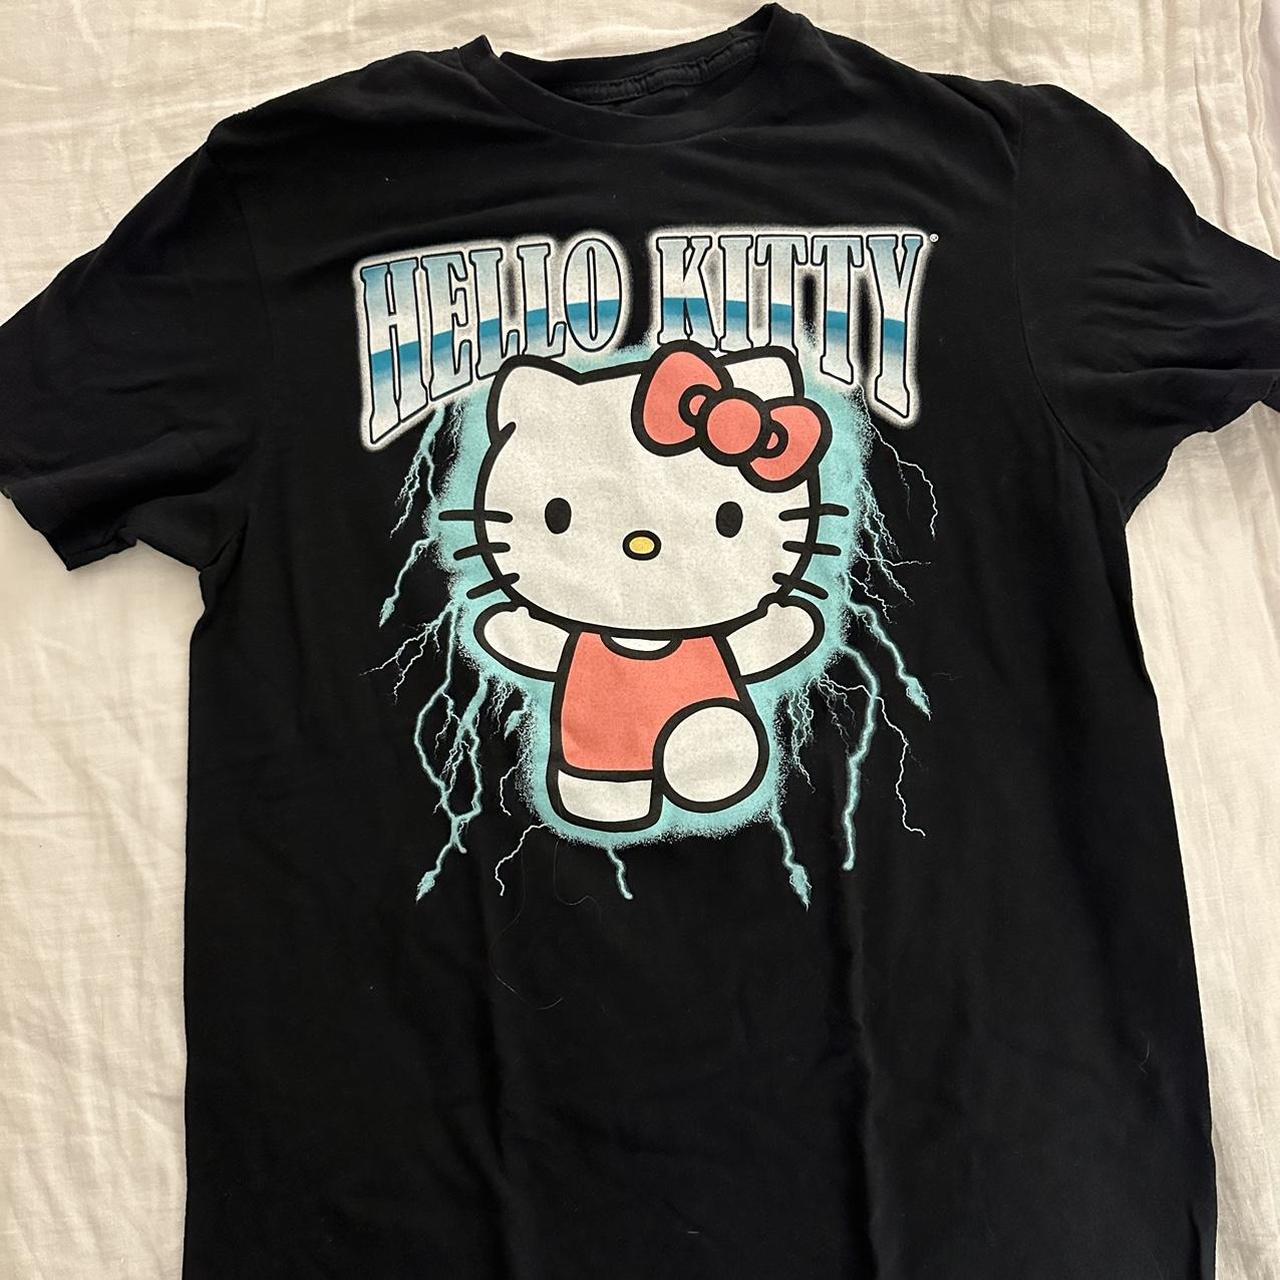 the most iconic hello kitty tee - Depop